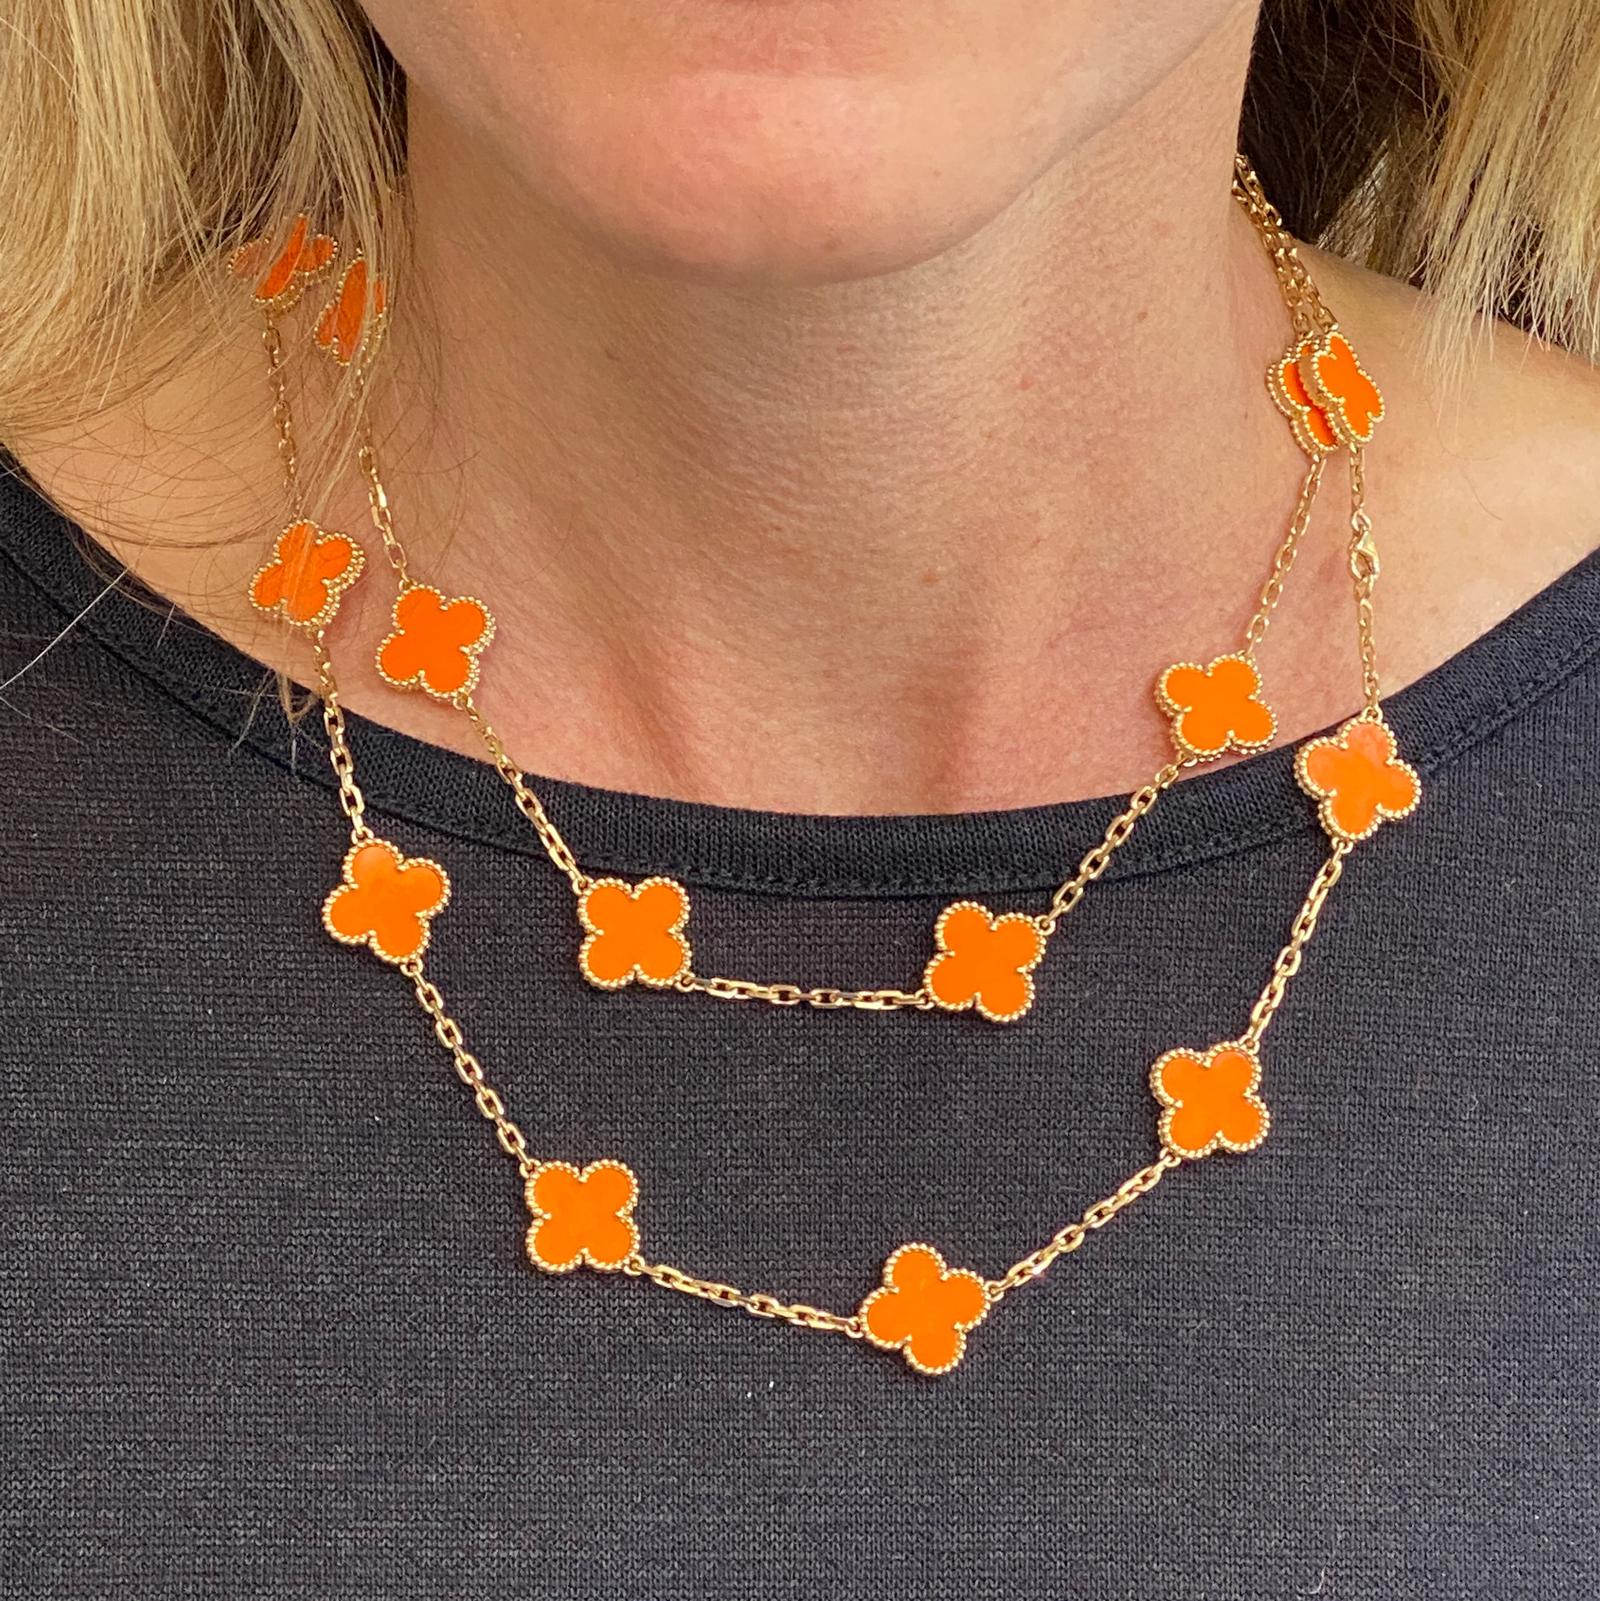 Rare Van Cleef & Arpels 20 Motif Alhambra orange coral necklace fashioned in 18 karat yellow gold. The necklace features 20 clover motif sections with orange coral inlay. The necklace measures 34 inches in length, is signed VCA, numbered, and